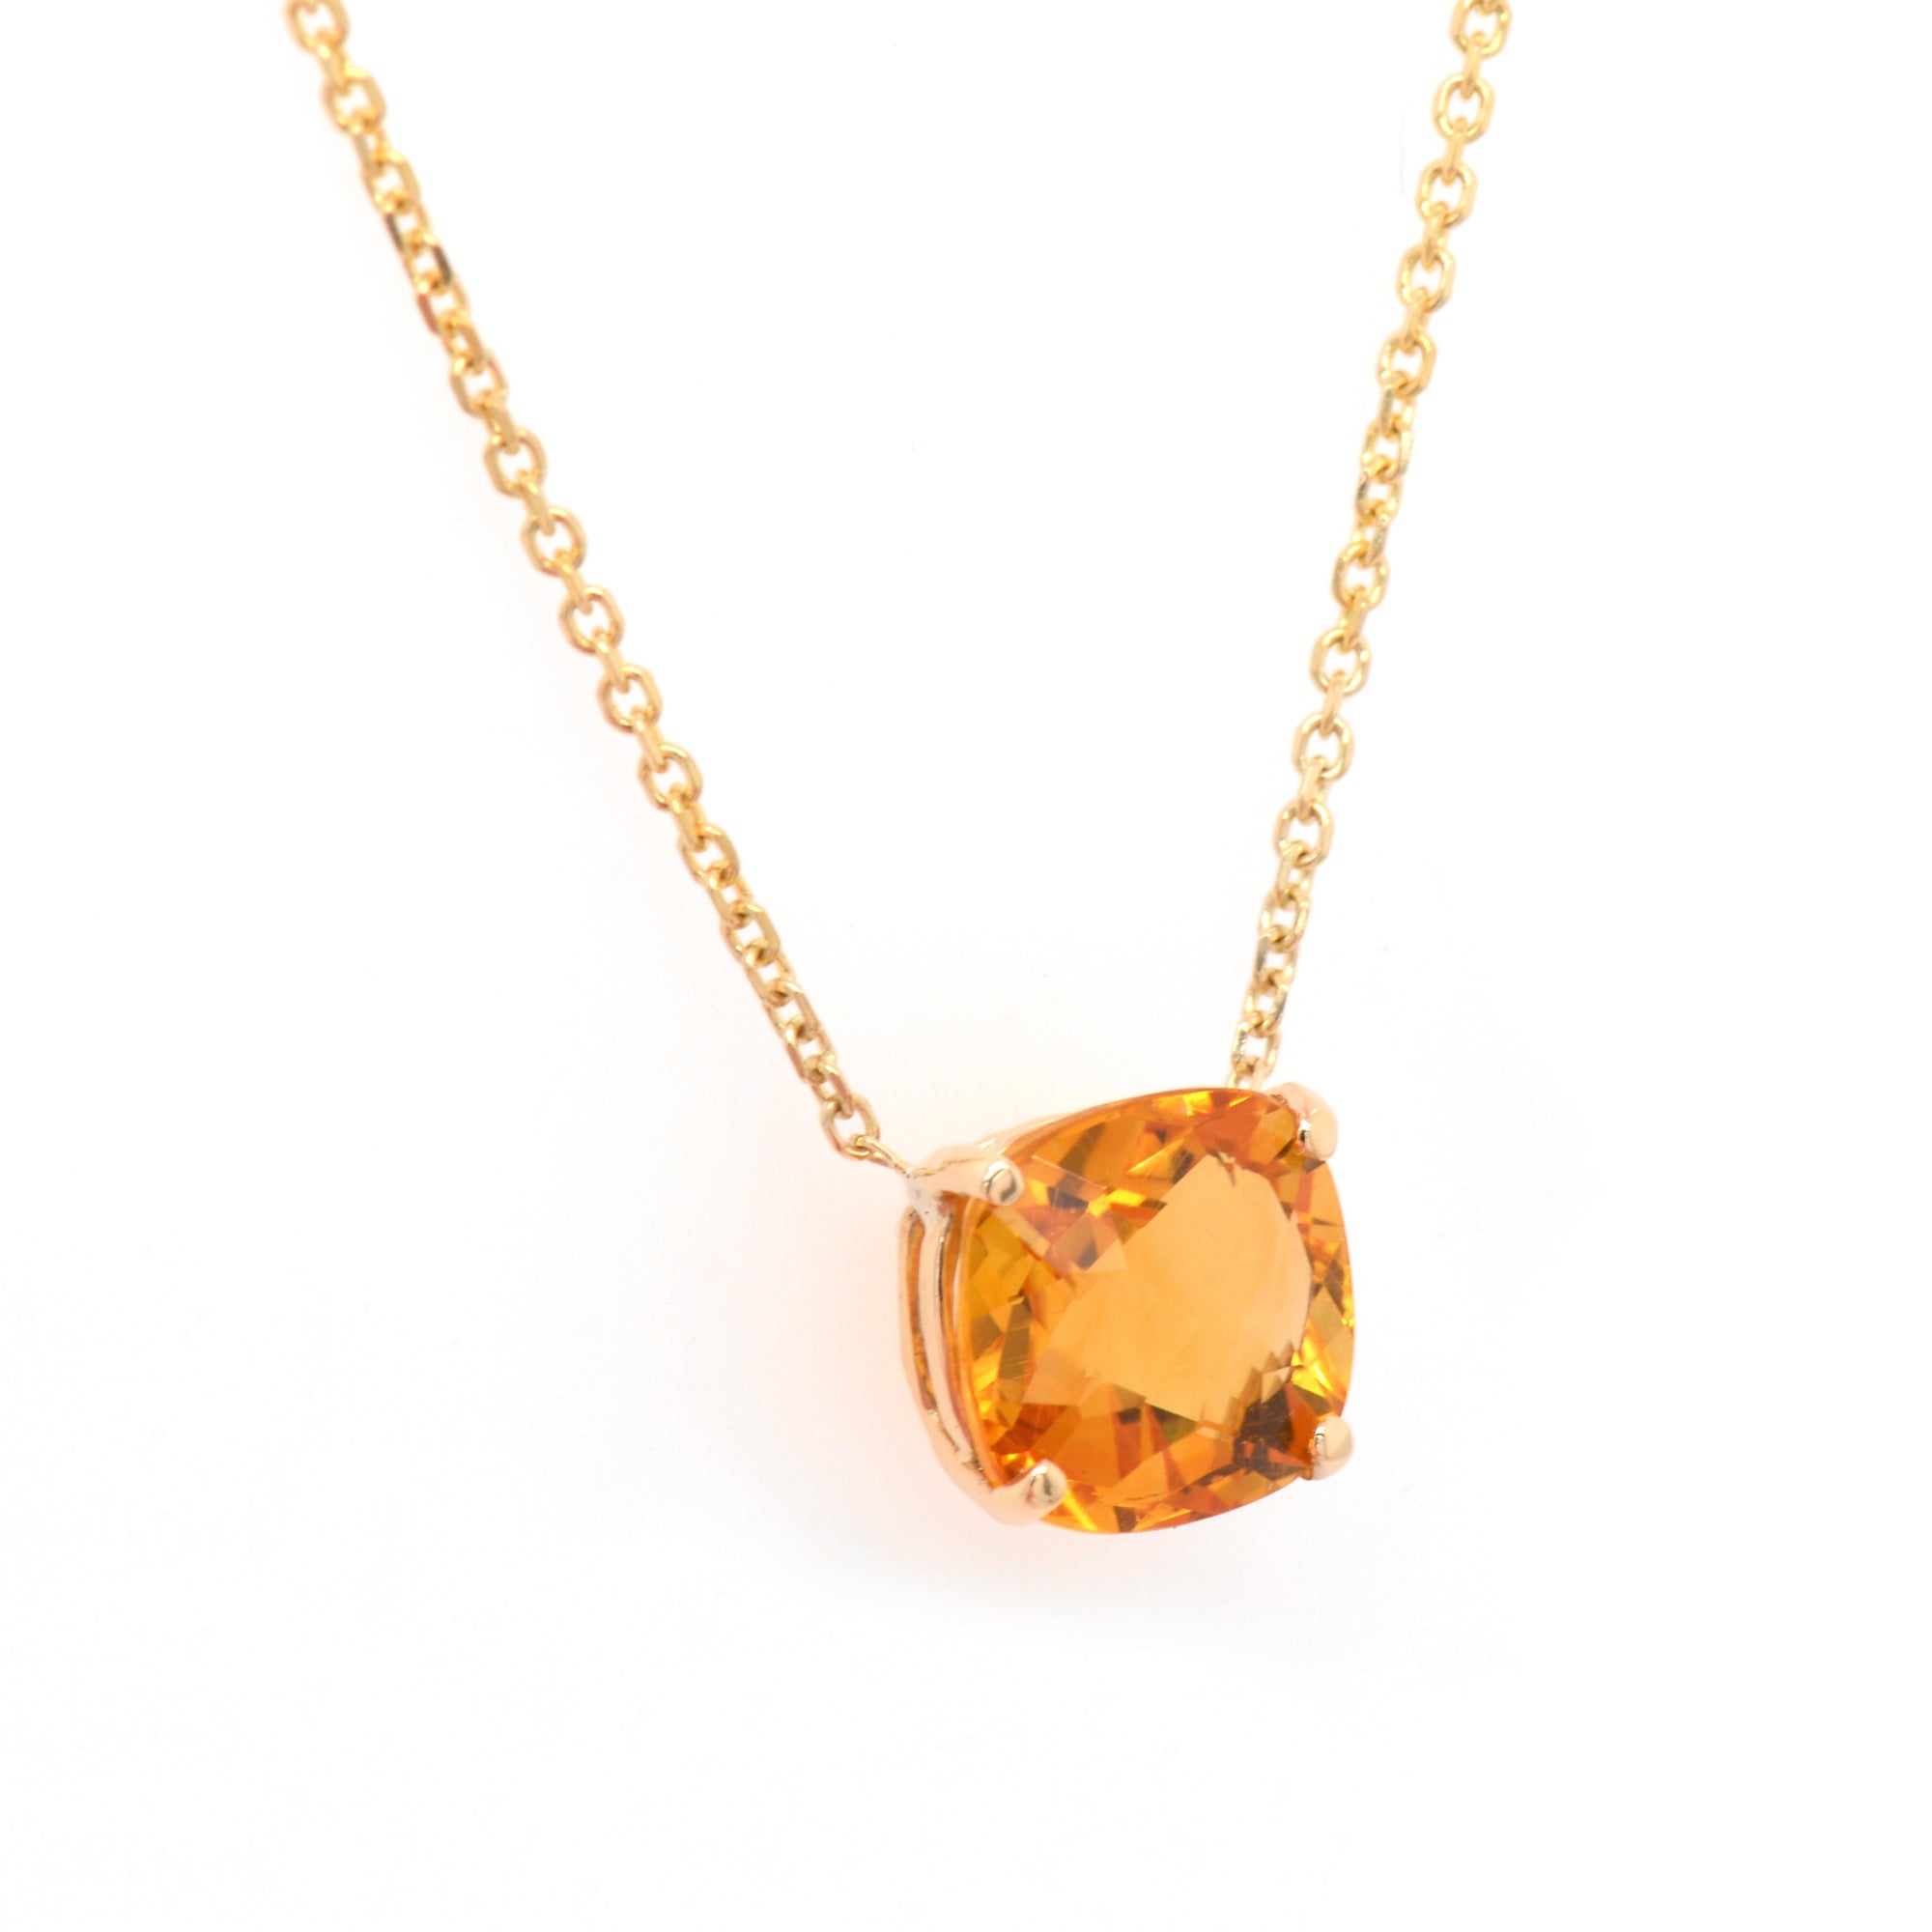 14K yellow gold citrine necklace featuring 1 cushion-shaped yellow-orange citrine measuring 8x8 mm.